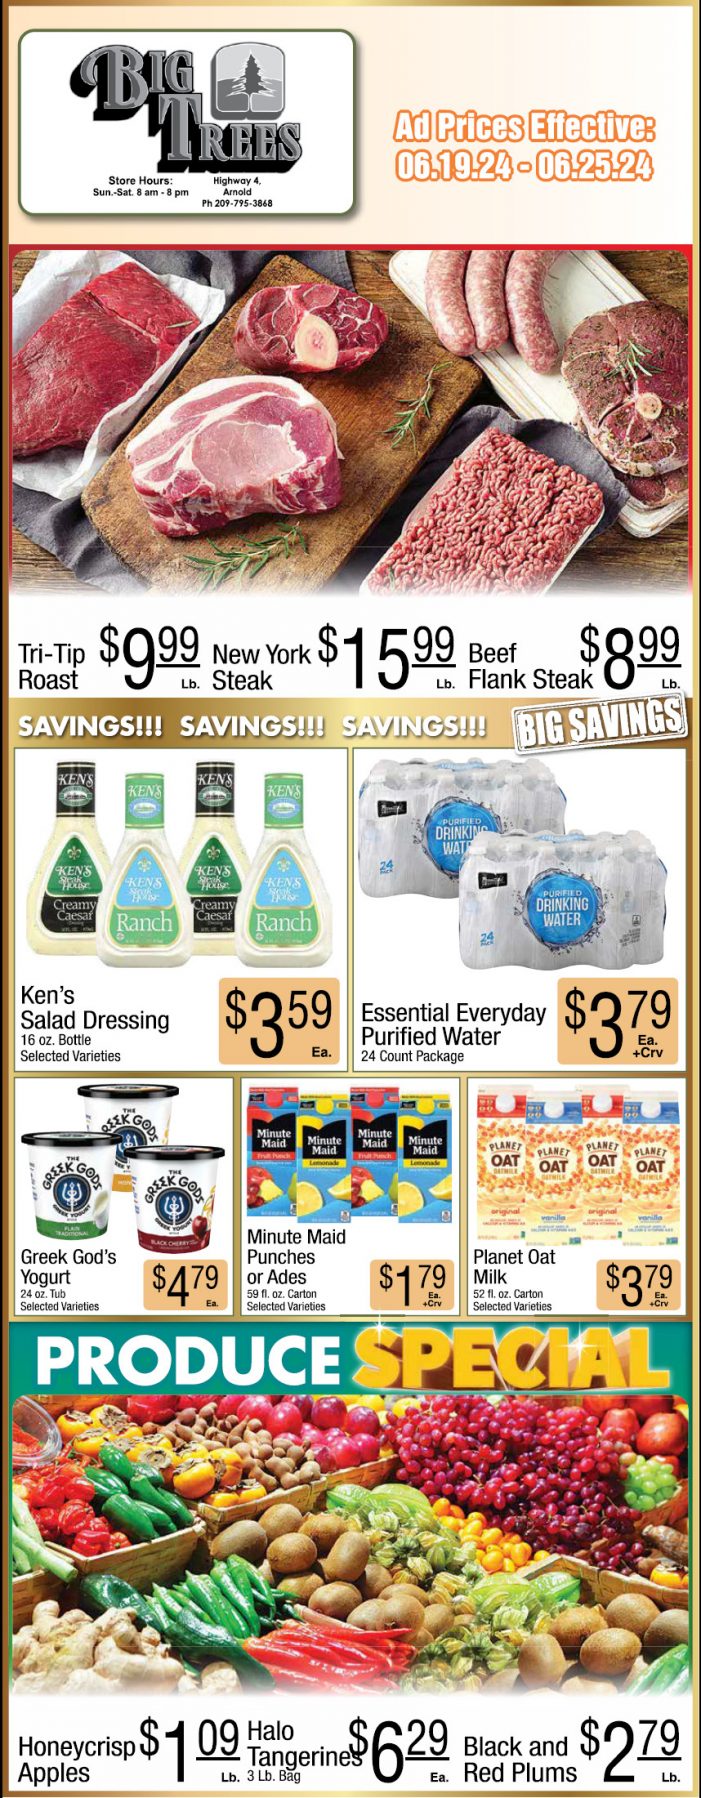 Big Trees Market Weekly Ad, Grocery, Produce, Meat & Deli Specials Through June 25th! Shop Local & Save!